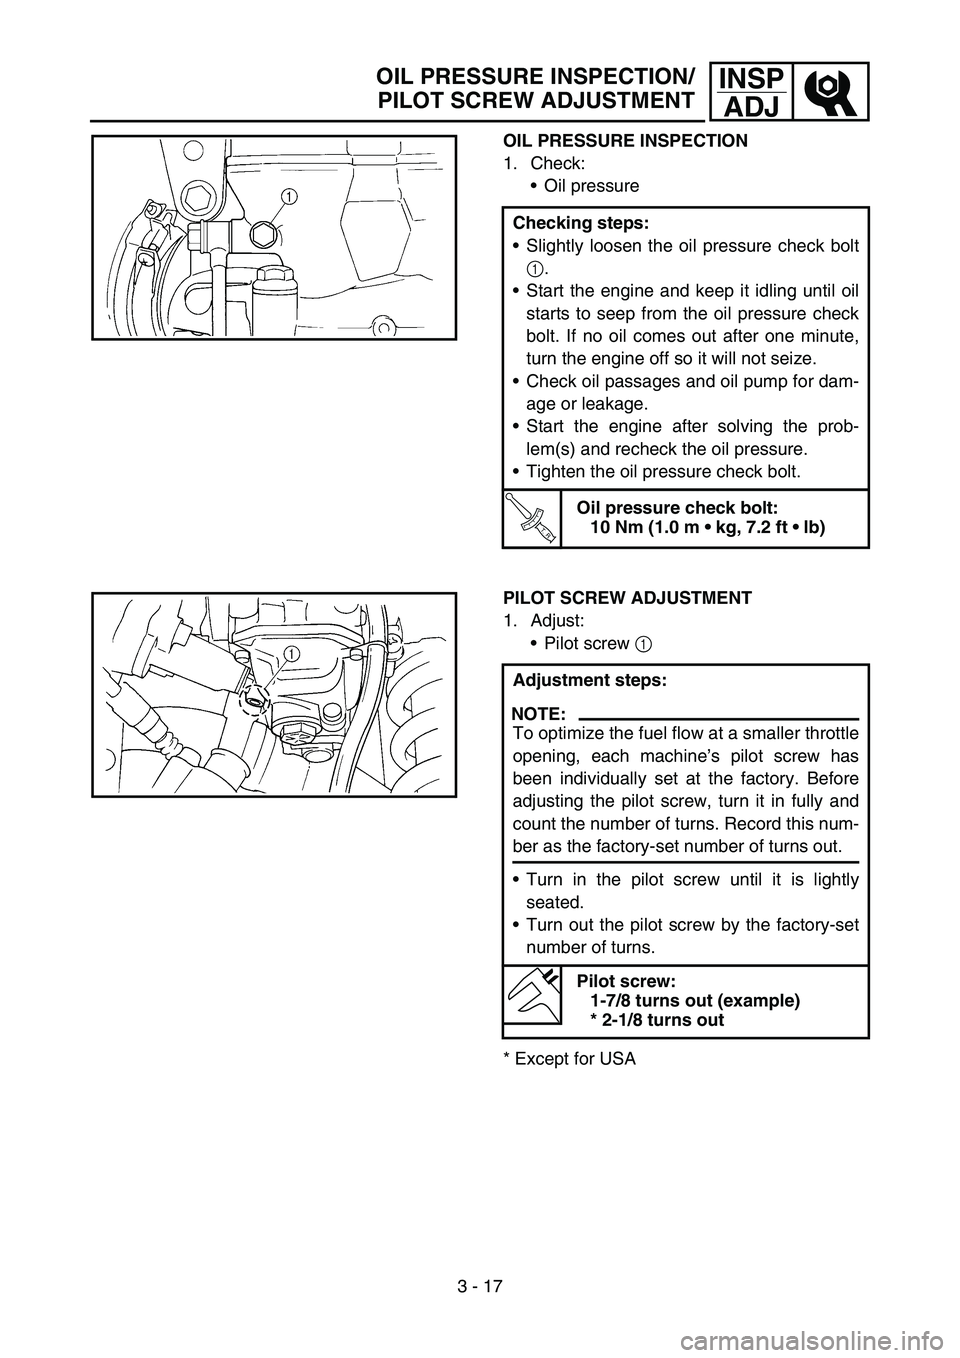 YAMAHA YZ250F 2005  Owners Manual 3 - 17
INSP
ADJ
OIL PRESSURE INSPECTION
1. Check:
Oil pressure
Checking steps:
Slightly loosen the oil pressure check bolt
1.
Start the engine and keep it idling until oil
starts to seep from the o